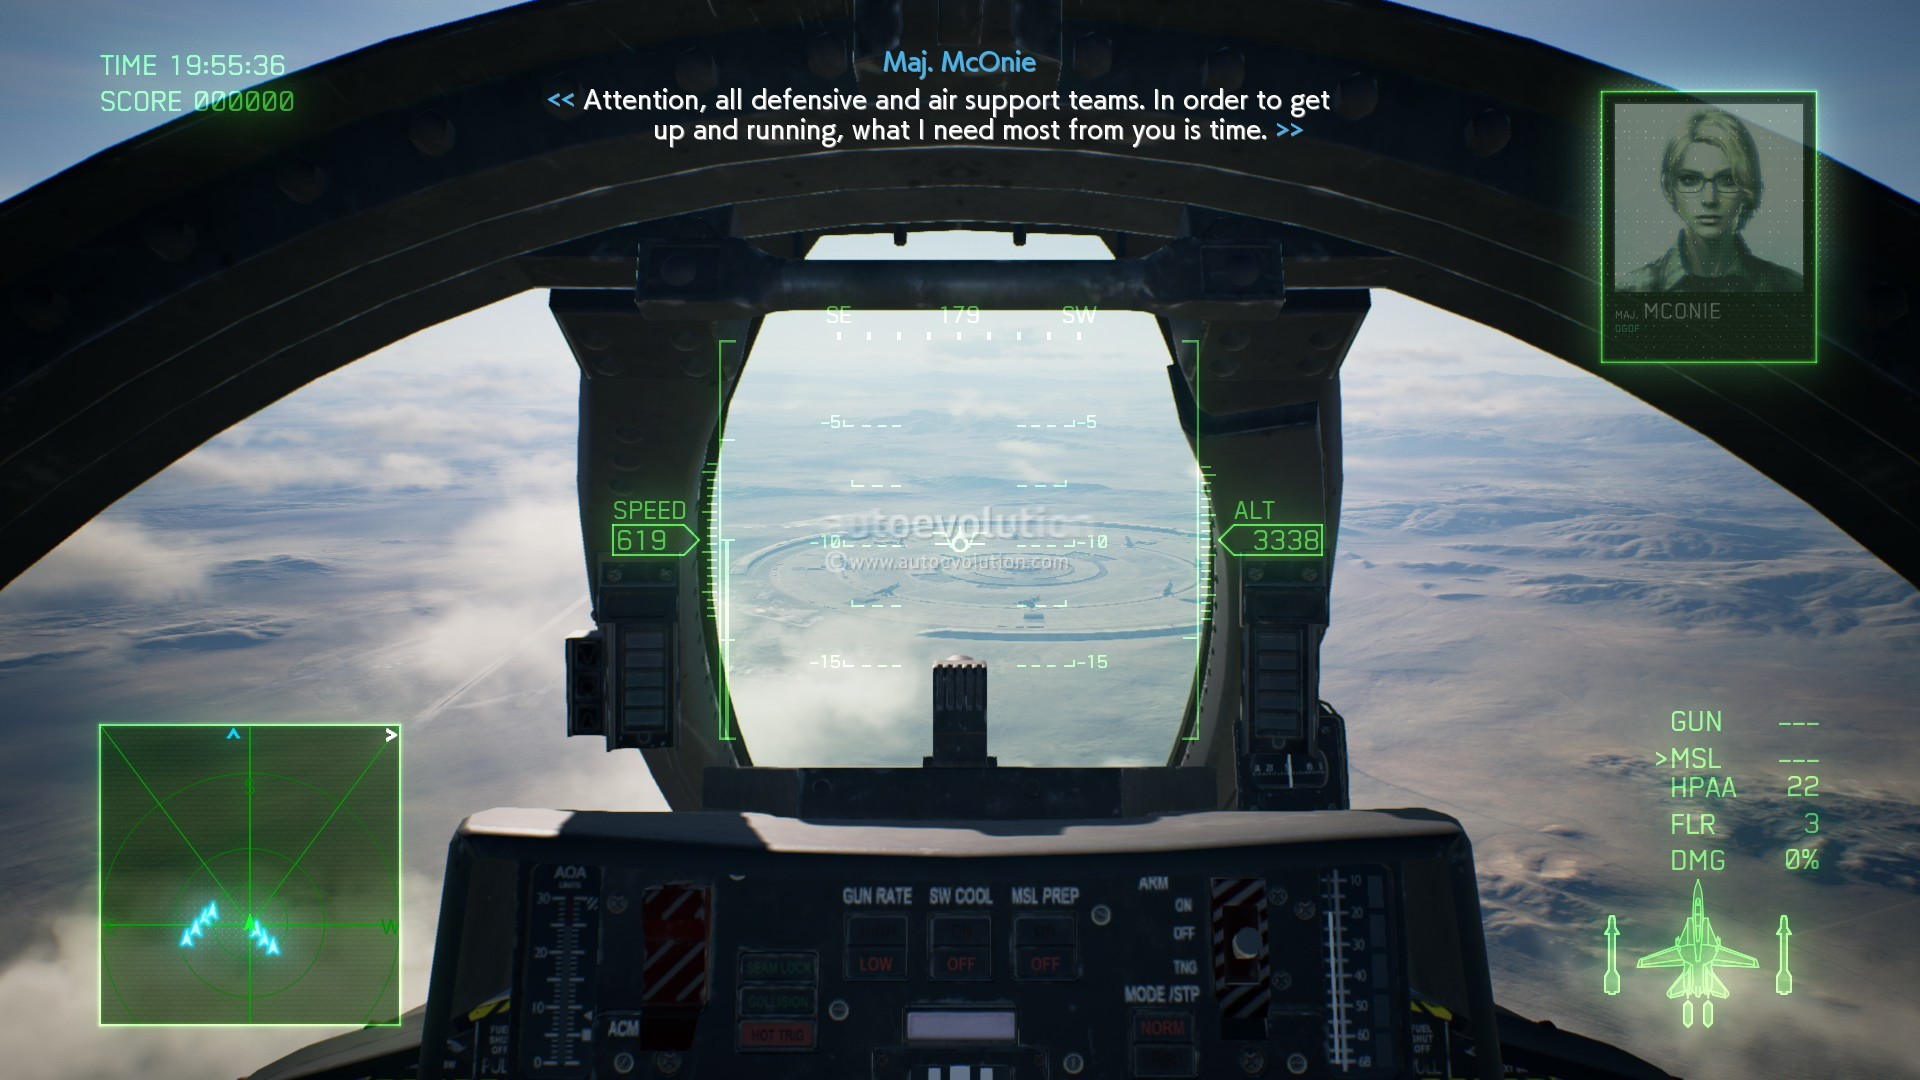 Ace Combat 7 Top Gun - Maverick DLC Review (PC): Does It Live Up to the  Hype of the Movie? - autoevolution